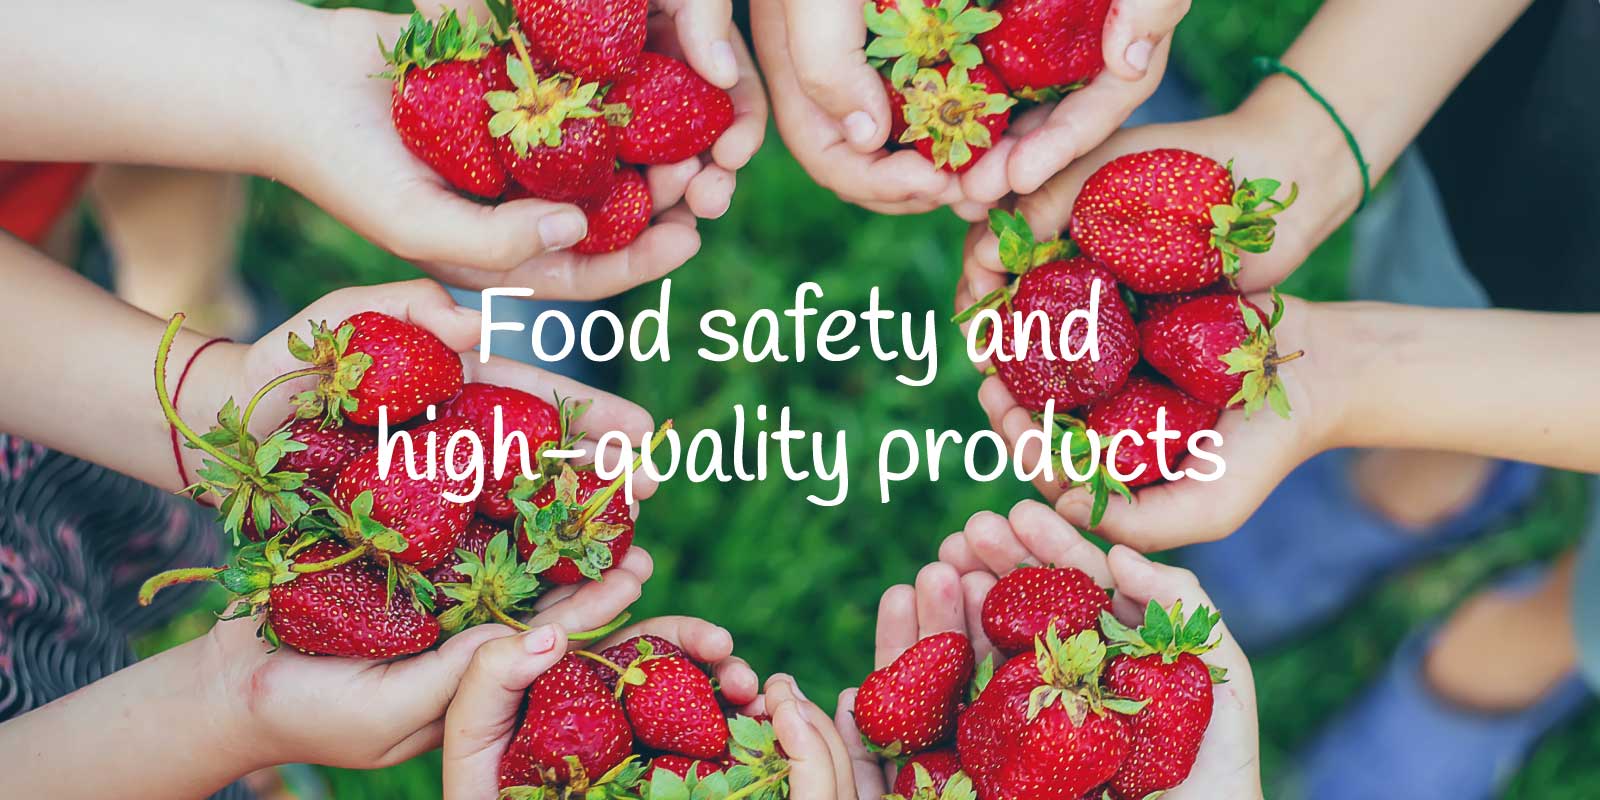 Sanco_Home_Food-safety-and-high-quality-products_Opcion-B